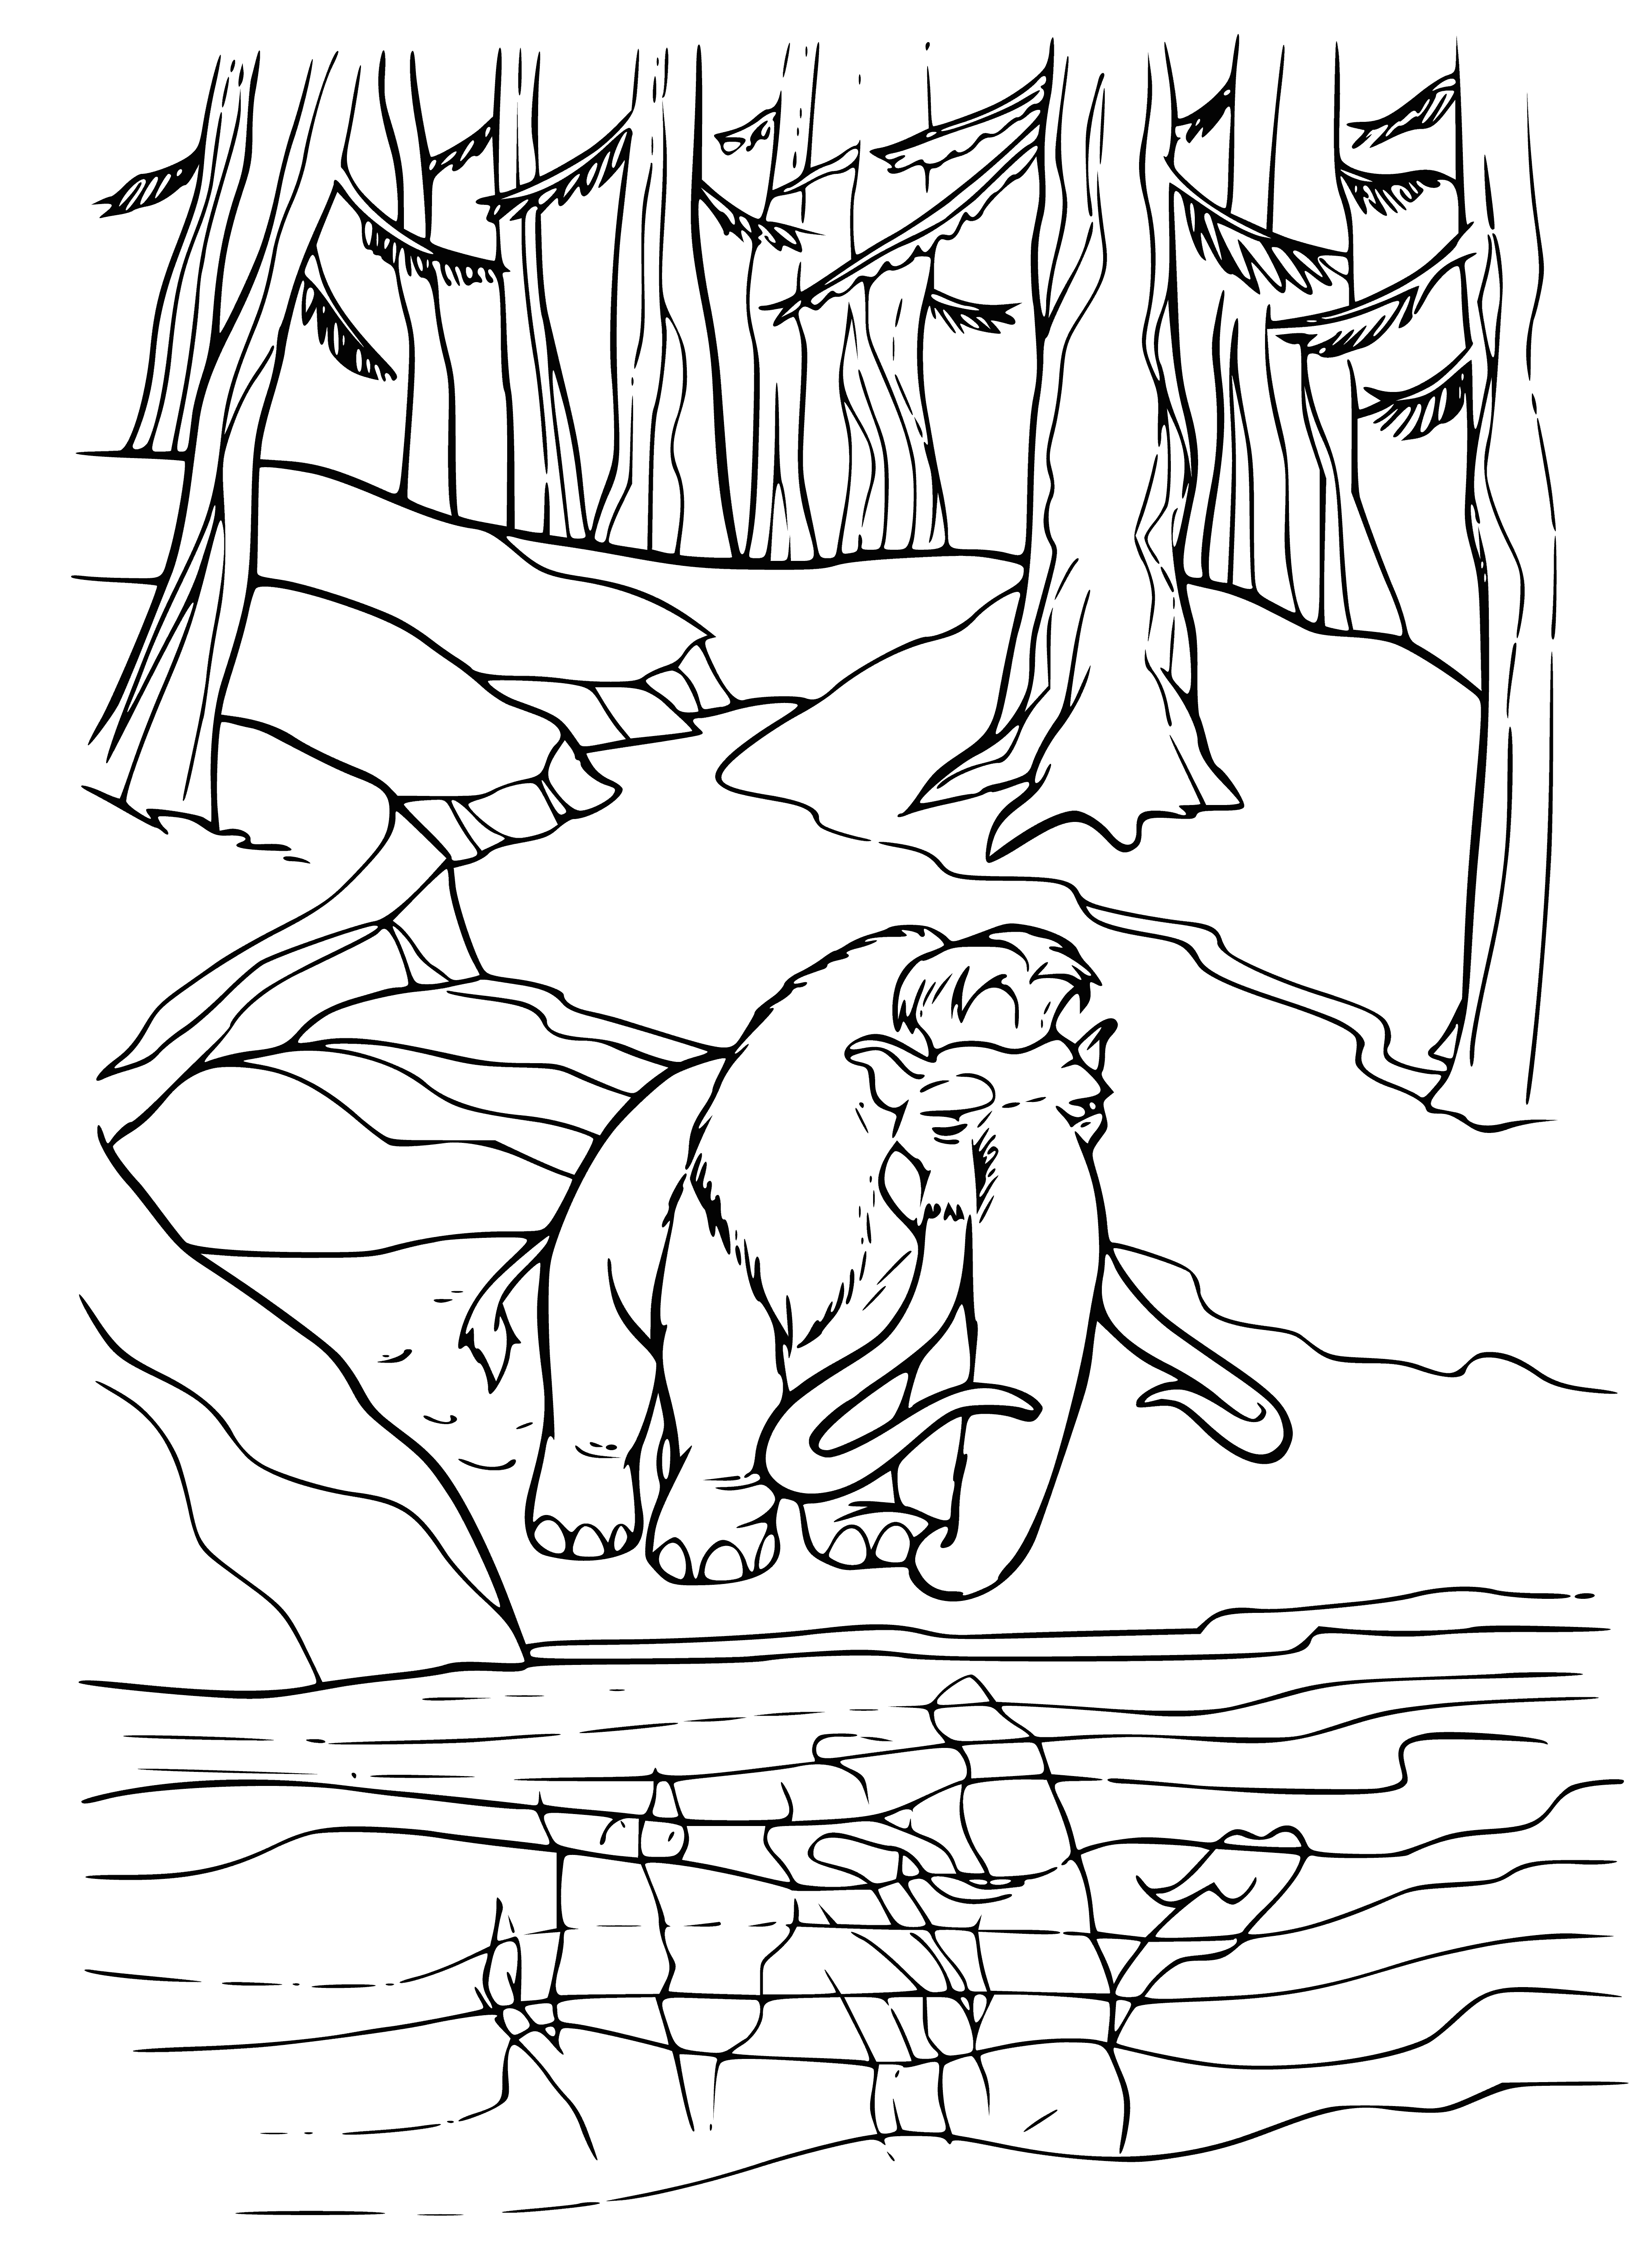 coloring page: Manny the mammoth is standing in a field of snow surrounded by huge mountains on a cloudy, gray day looking sad and lonely.